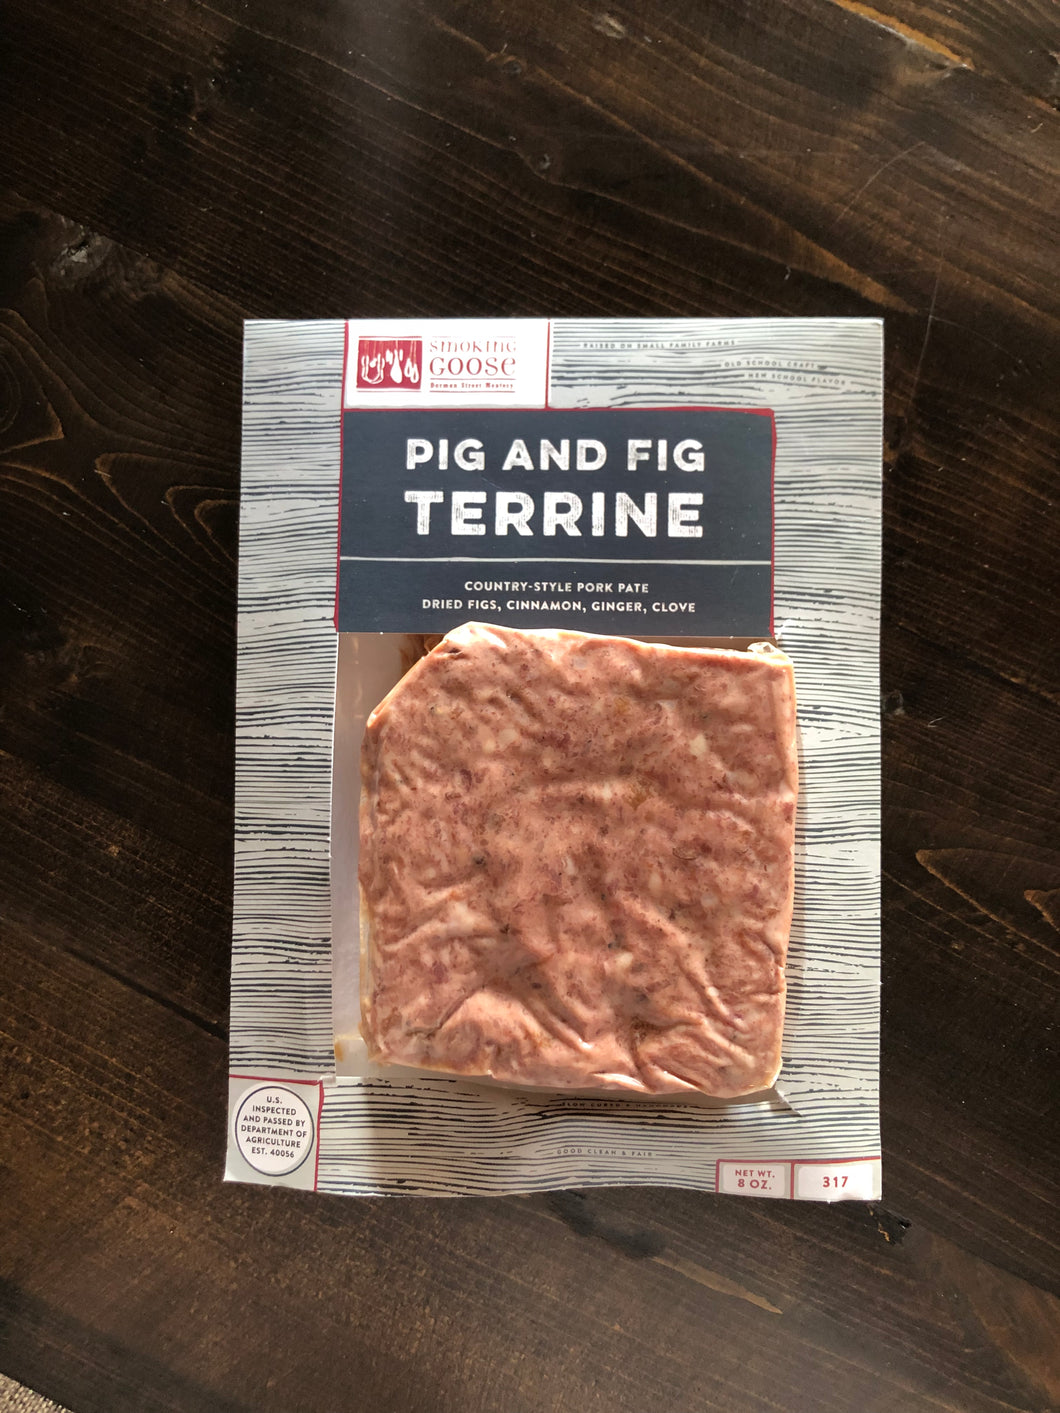 Pig and Fig Terrine by Smoking Goose